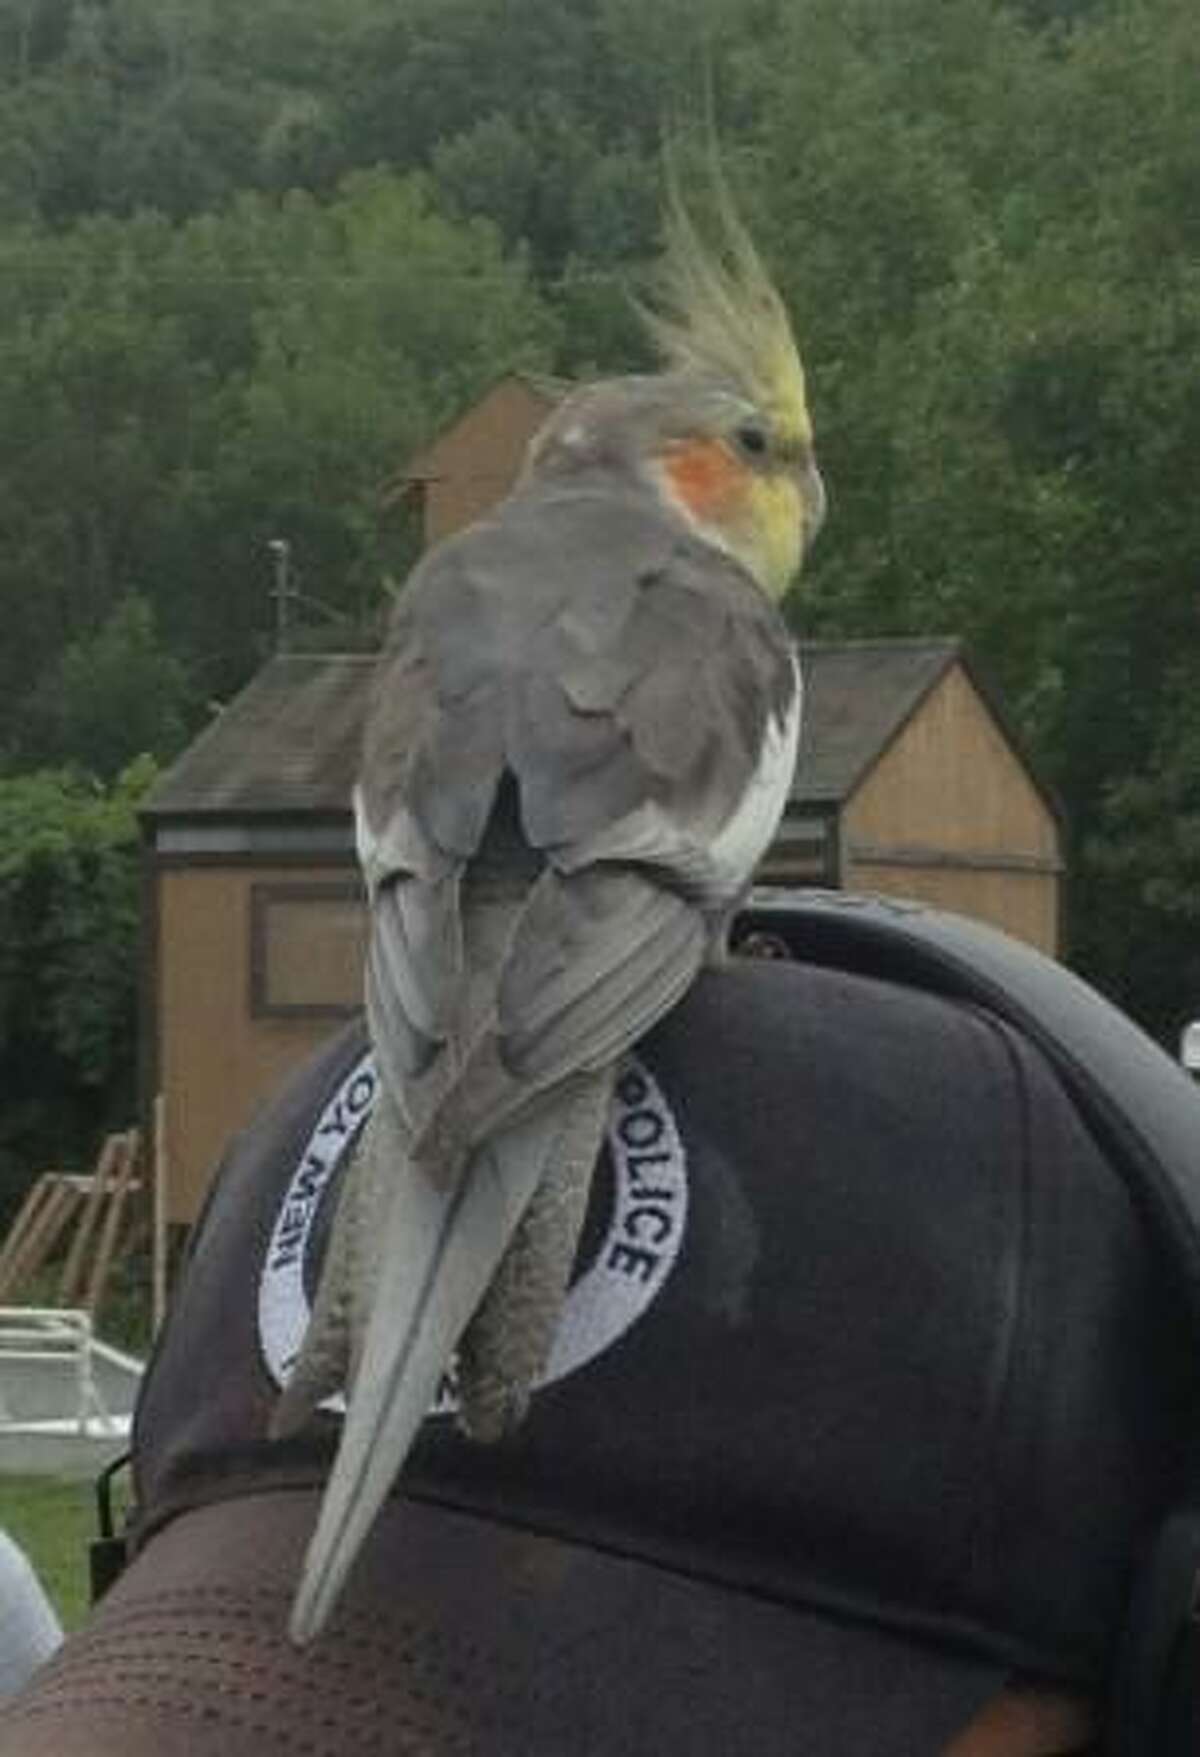 State Police said this cockatiel flew into a firing range in Guilderland on Tuesday and landed on the head of a State Police recruit. (State Police photo)